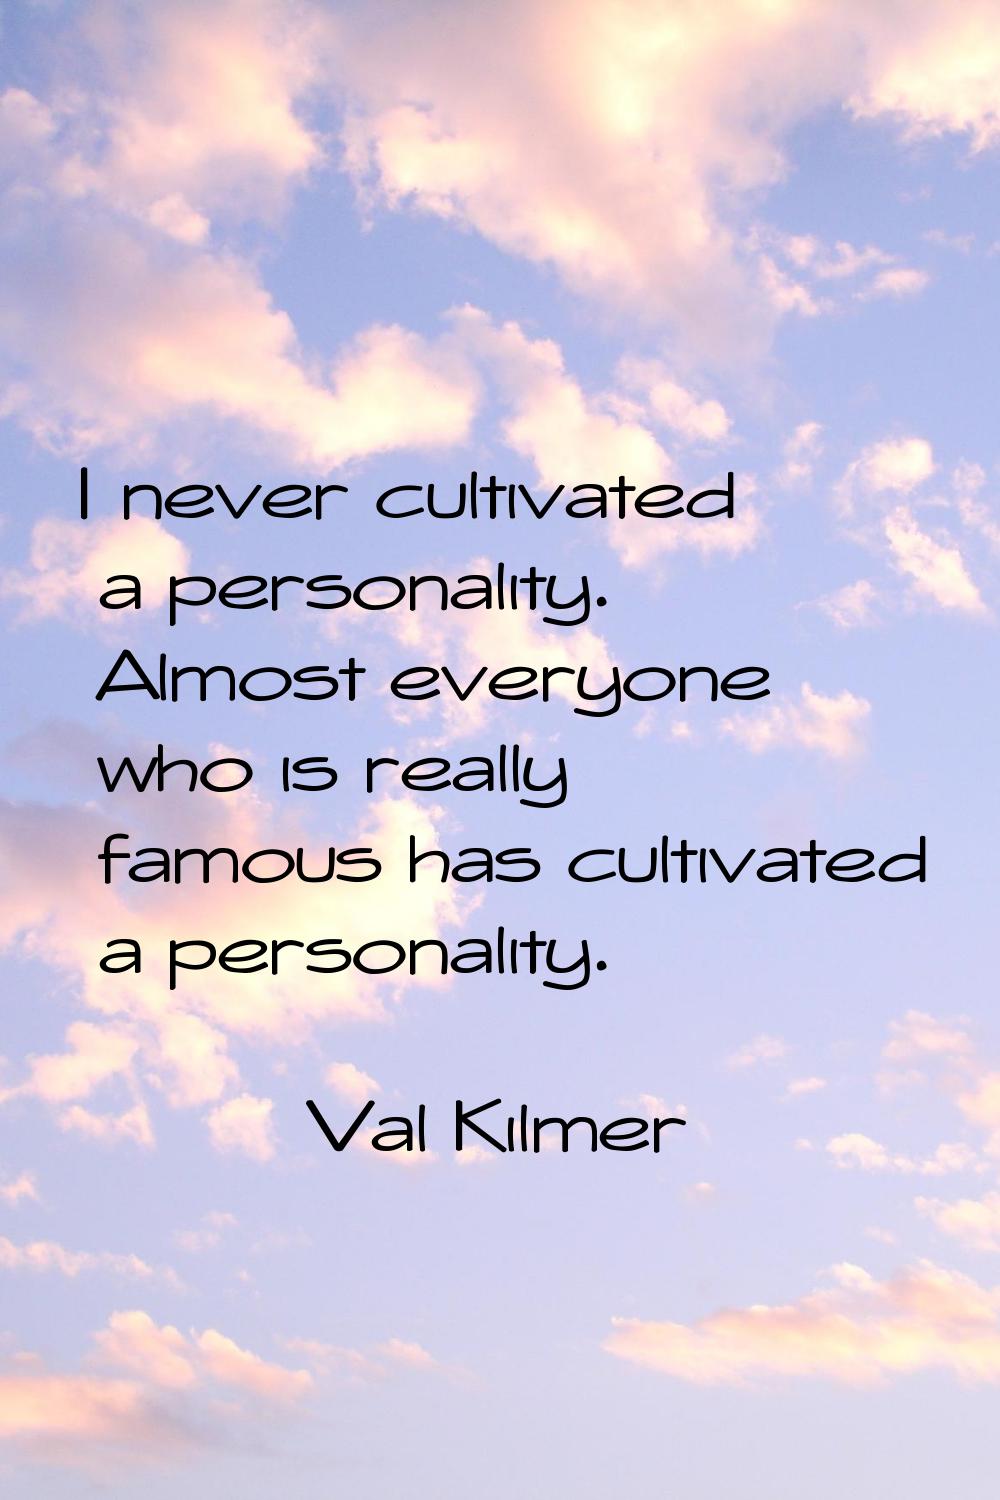 I never cultivated a personality. Almost everyone who is really famous has cultivated a personality